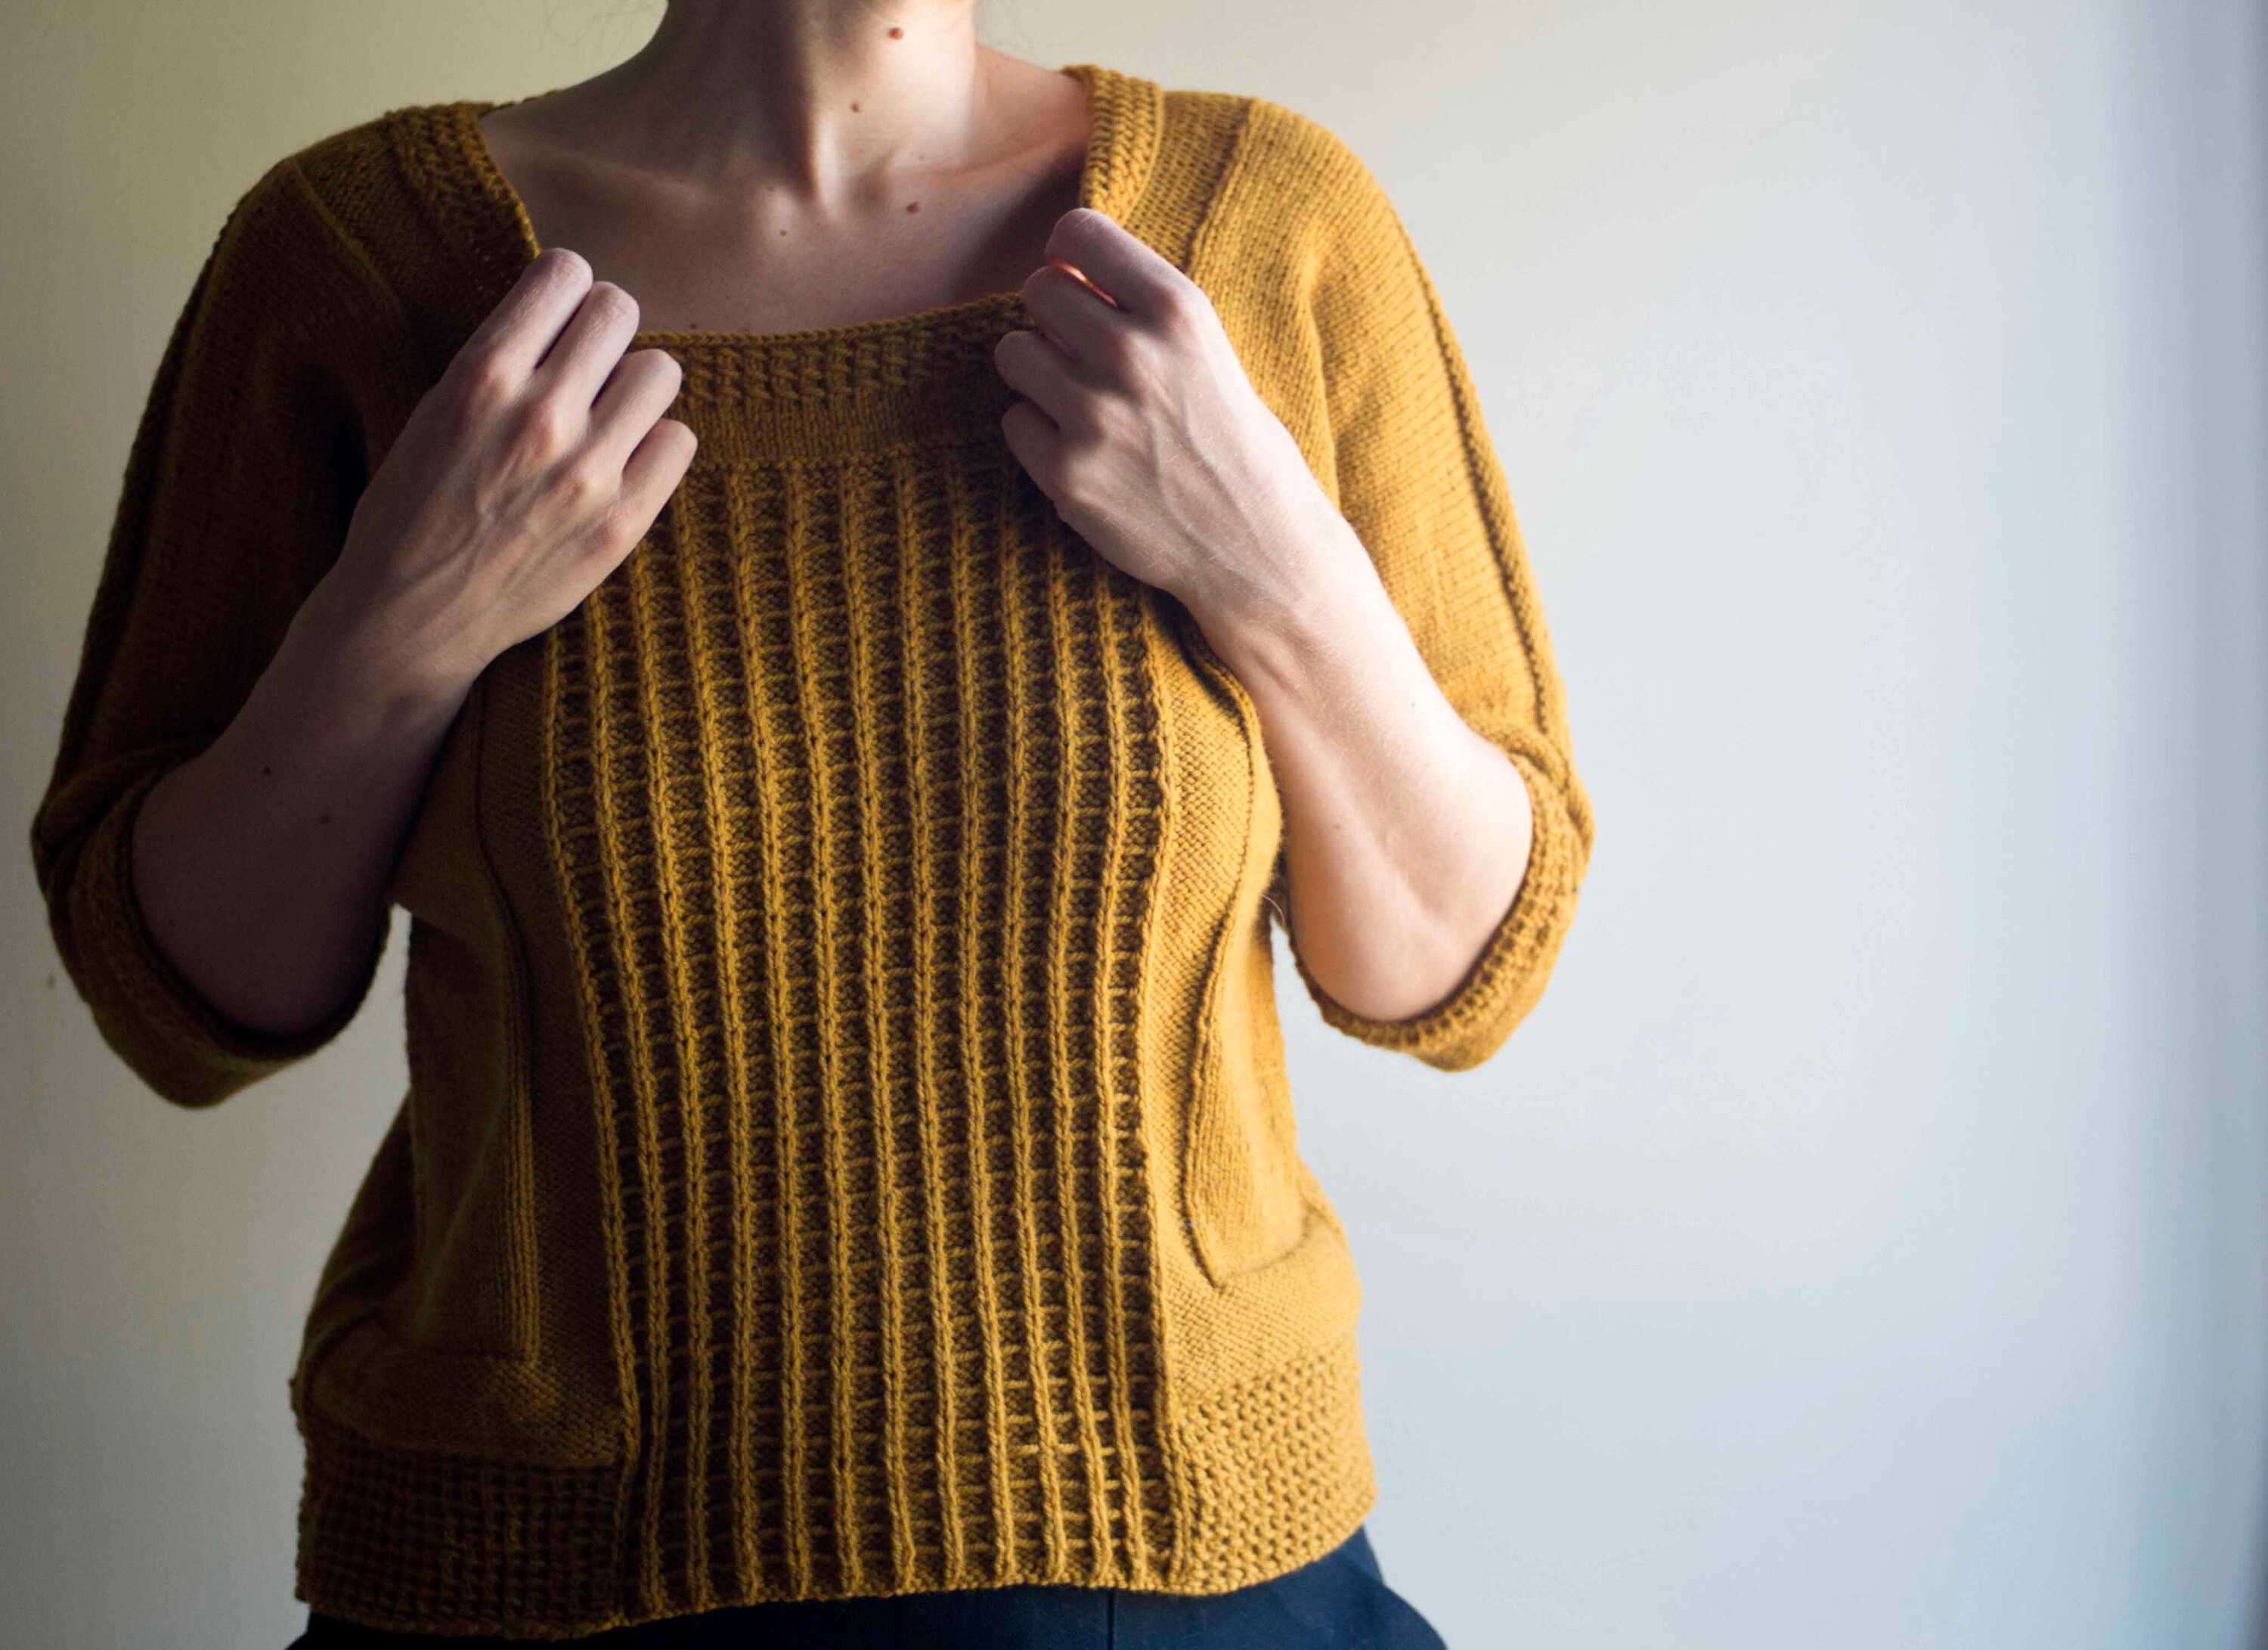 Machine knit a simple square sweater — Picture Healer - Feng Shui